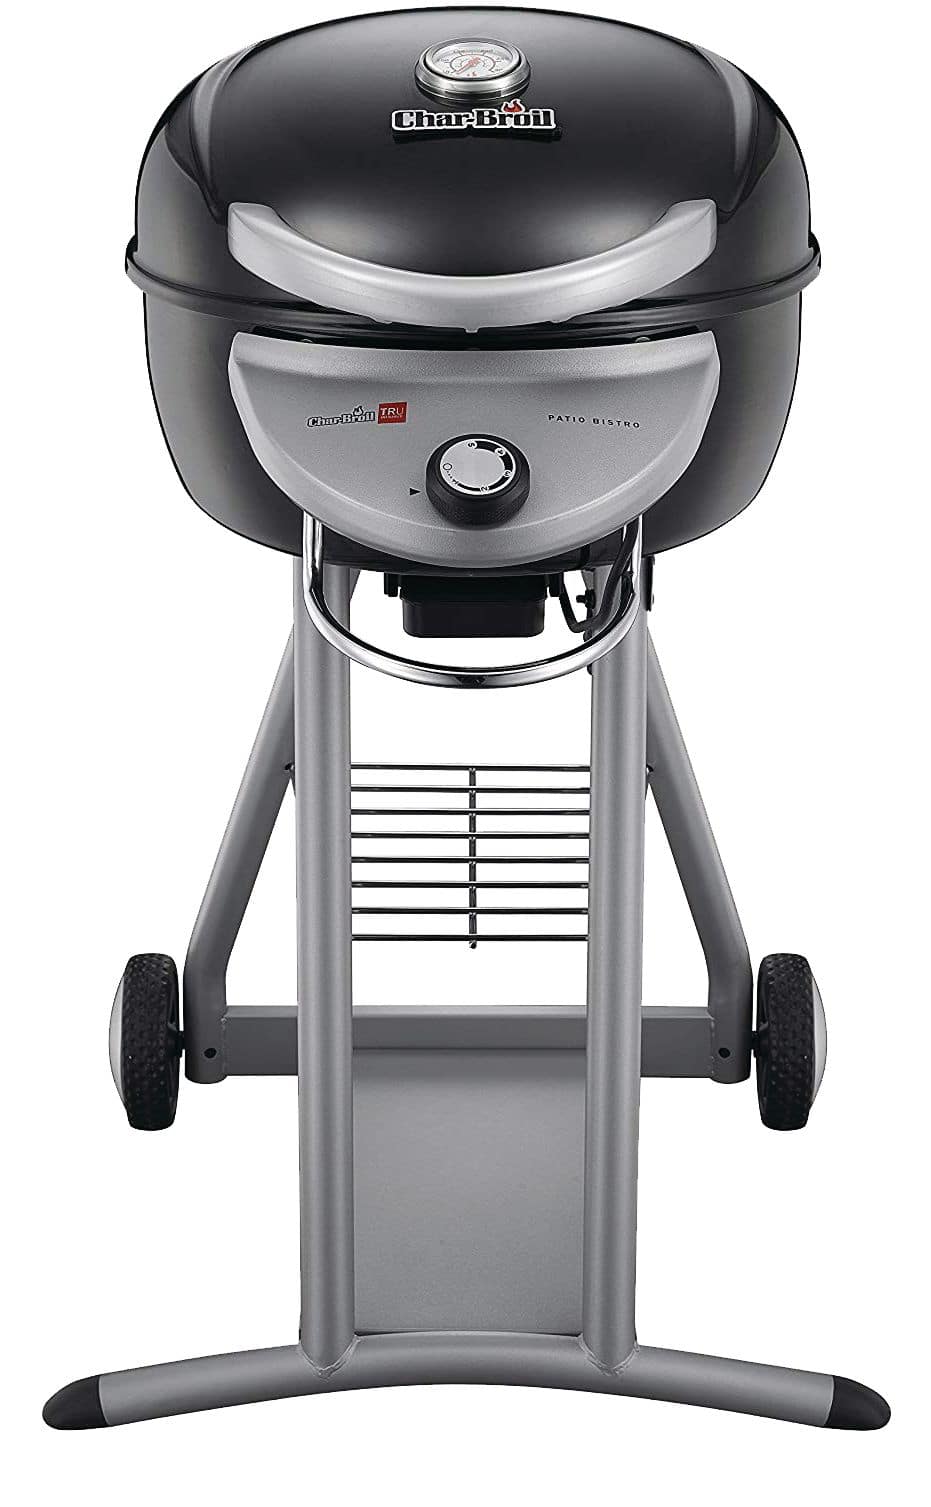 https://media-www.canadiantire.ca/product/seasonal-gardening/backyard-living/outdoor-cooking/0853146/char-broil-electric-bistro-infrared-bbq-c0031b11-b6a2-4c07-9434-d1fee3f9dbe9-jpgrendition.jpg